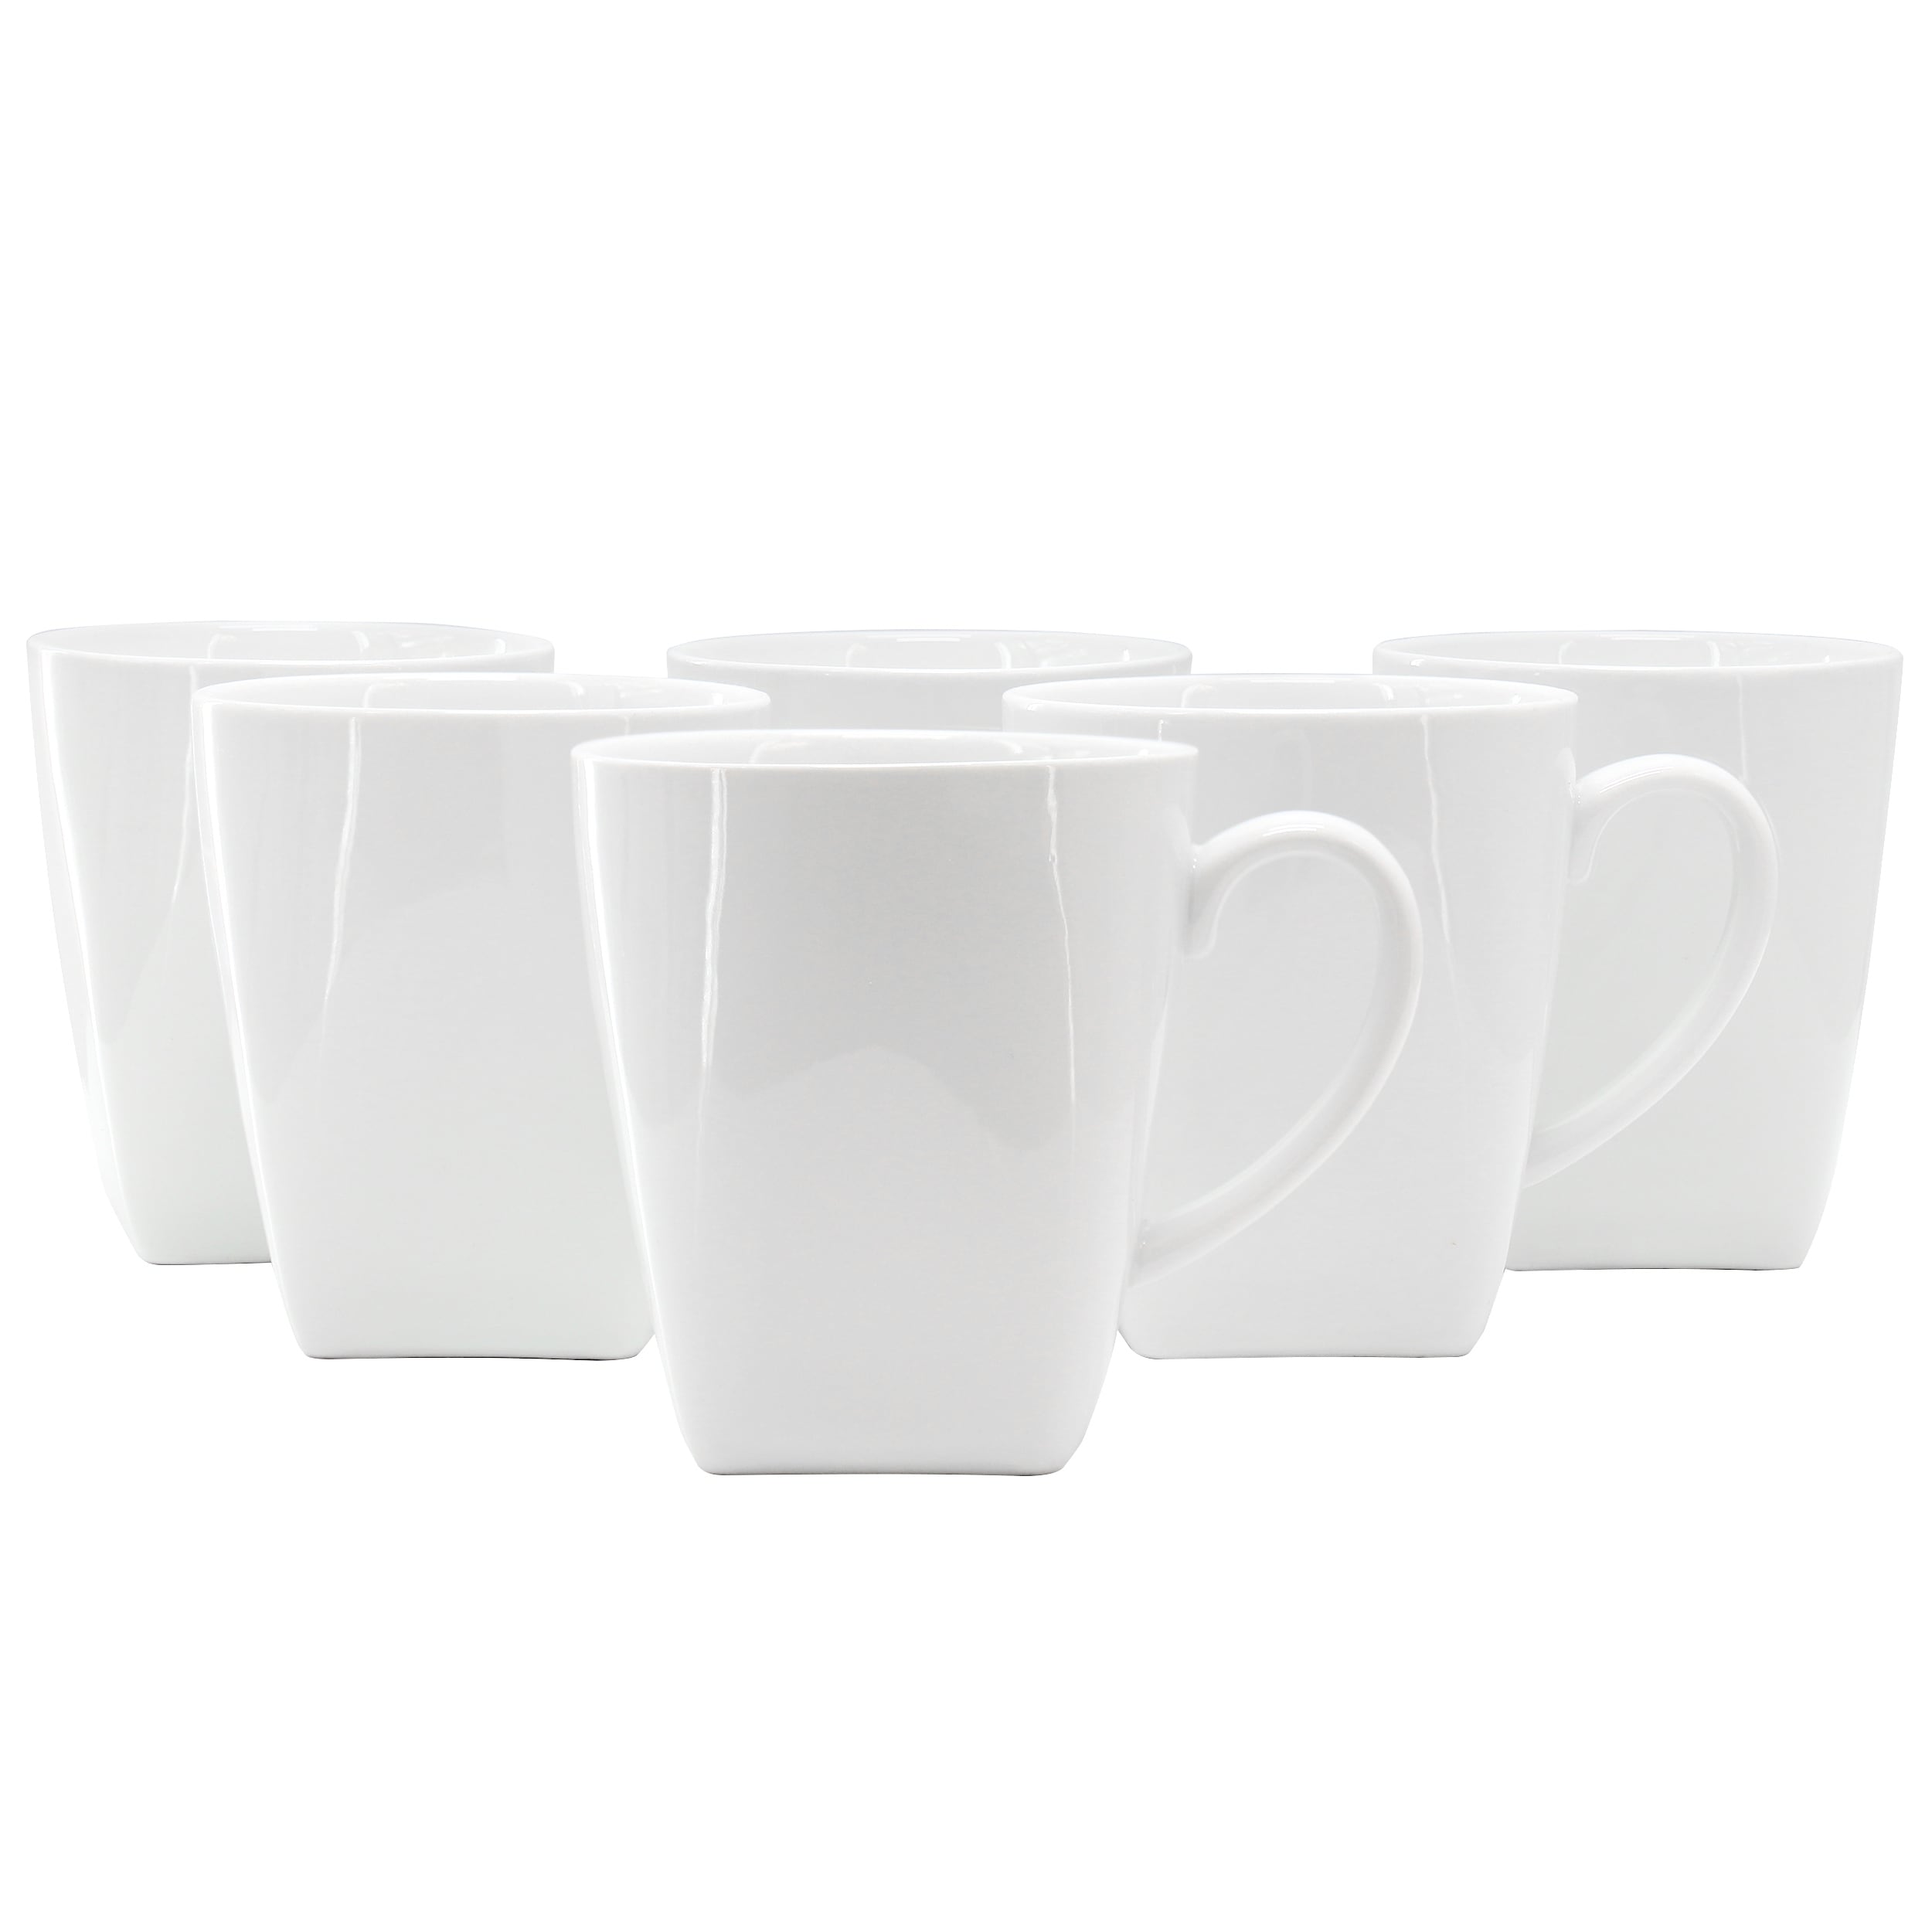 Our Table Simply White 6 Piece 13.26 Ounce Porcelain Mug Set in White